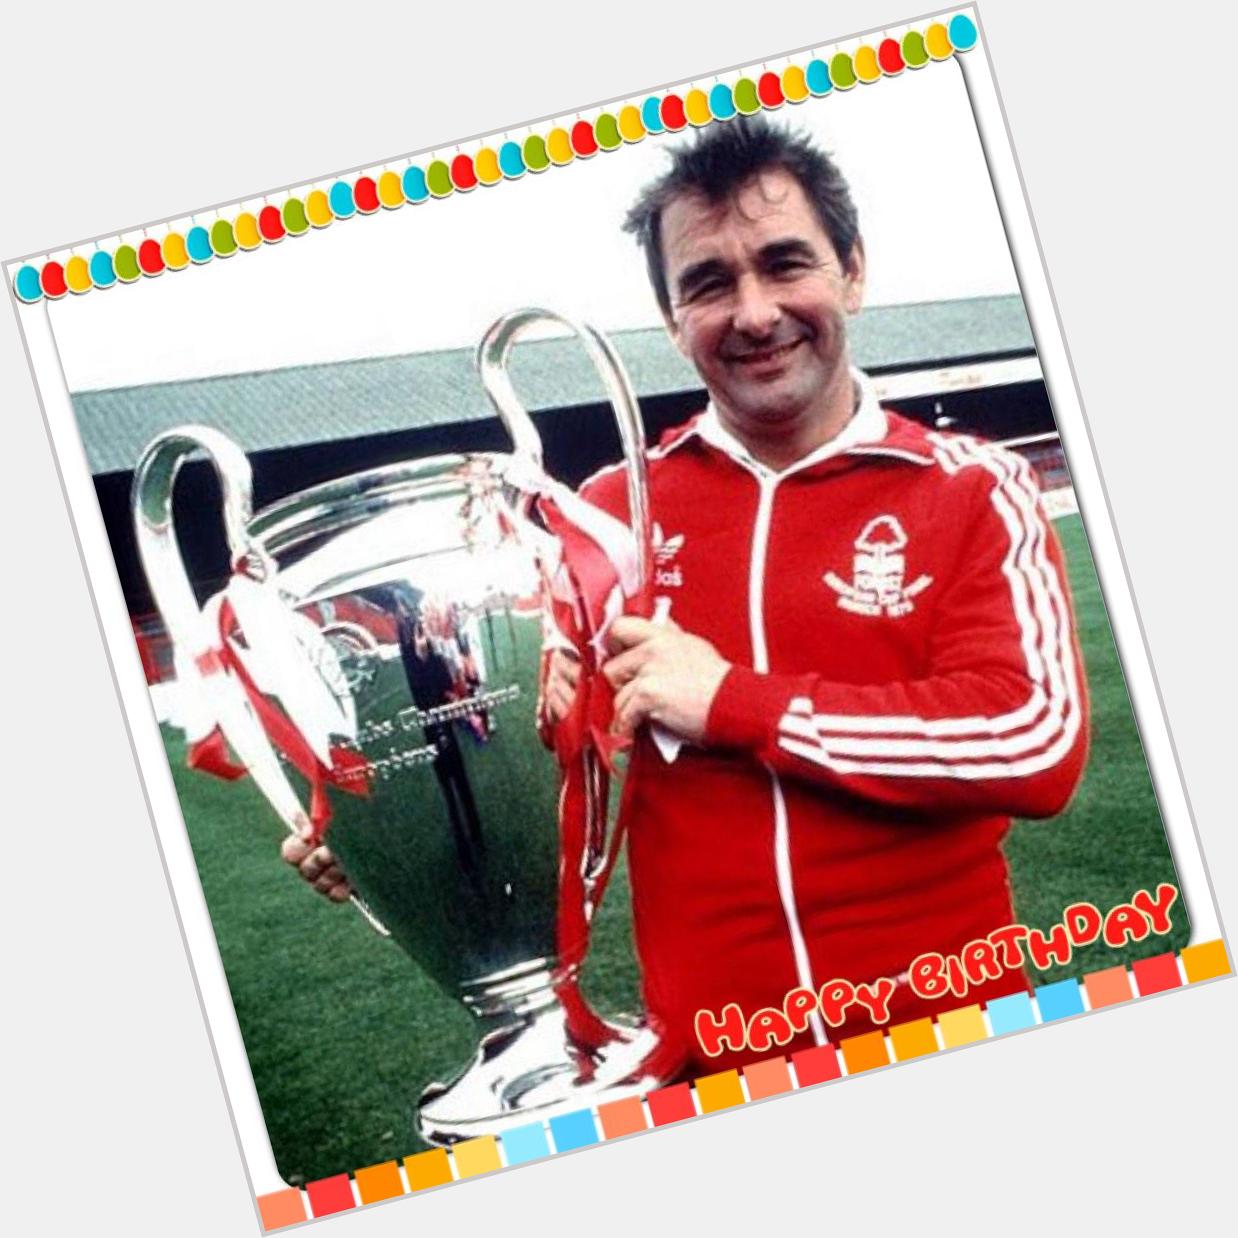 Happy 80th birthday to the one and only Brian Clough 